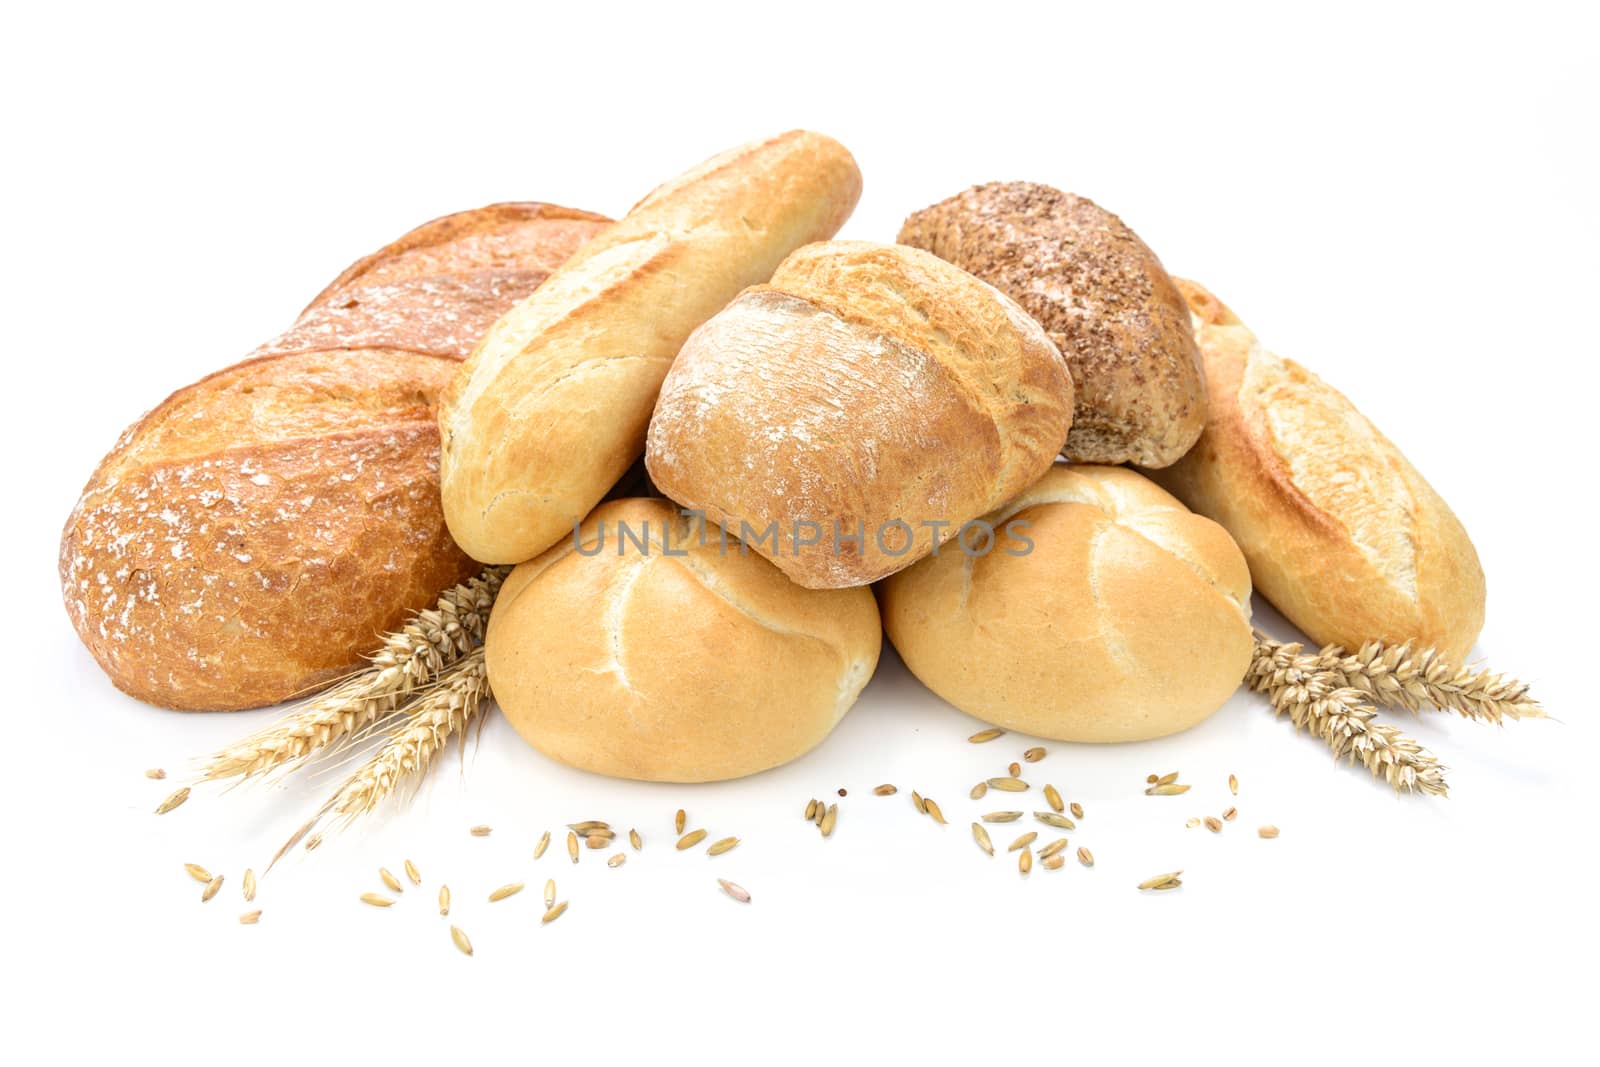 Group of fresh breads and wheat isolated on a white background.